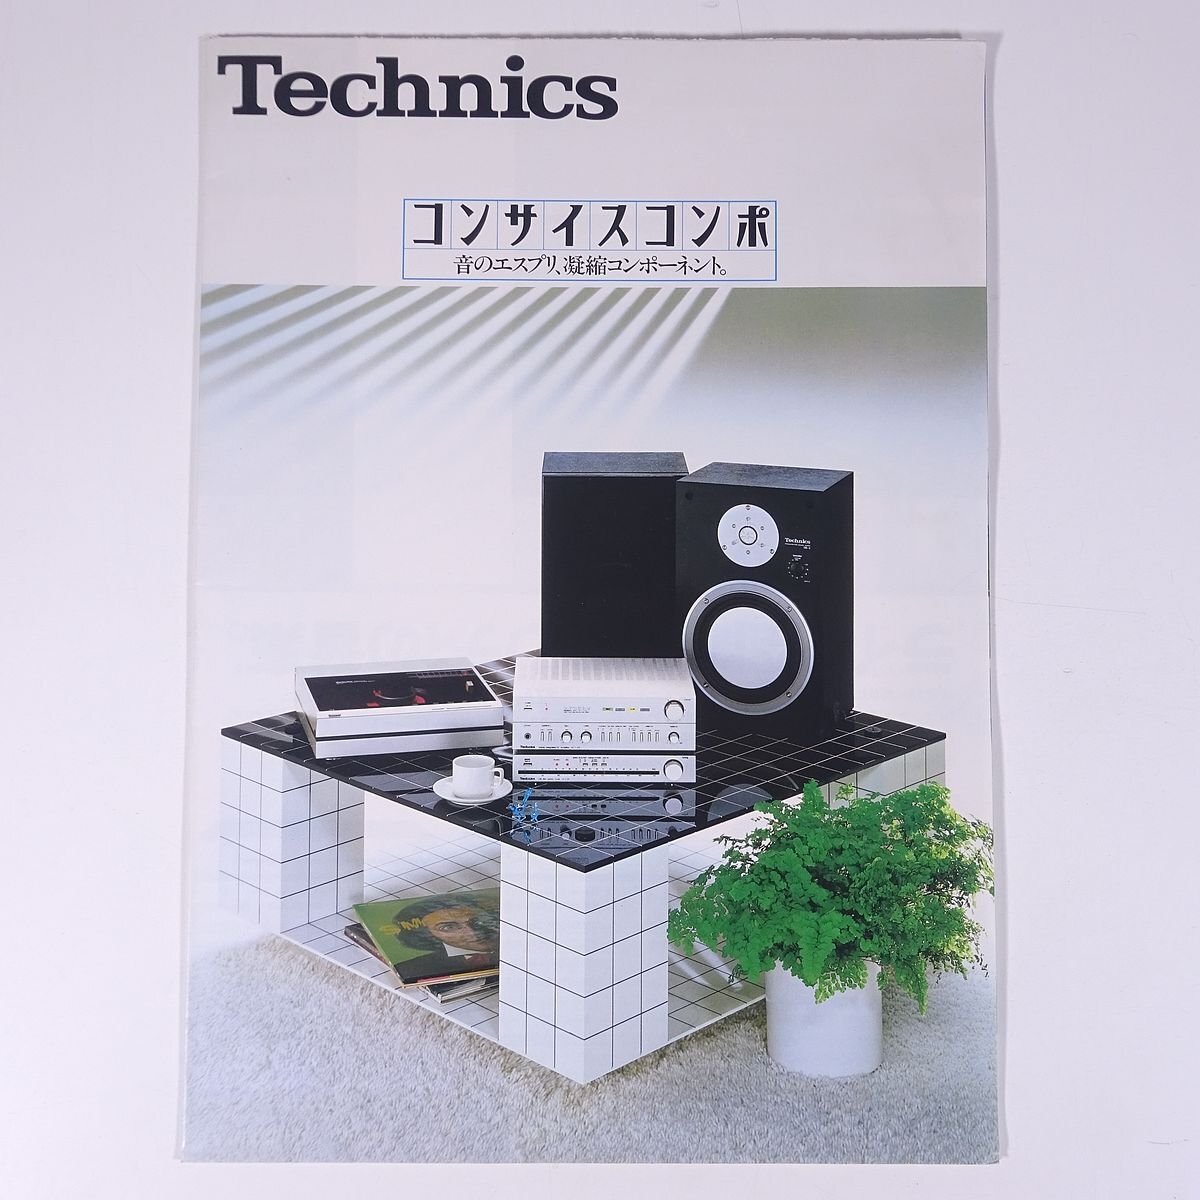 Technics Technics navy blue sa chair player Matsushita Electric Industrial corporation 1980 year about Showa era small booklet catalog pamphlet audio 